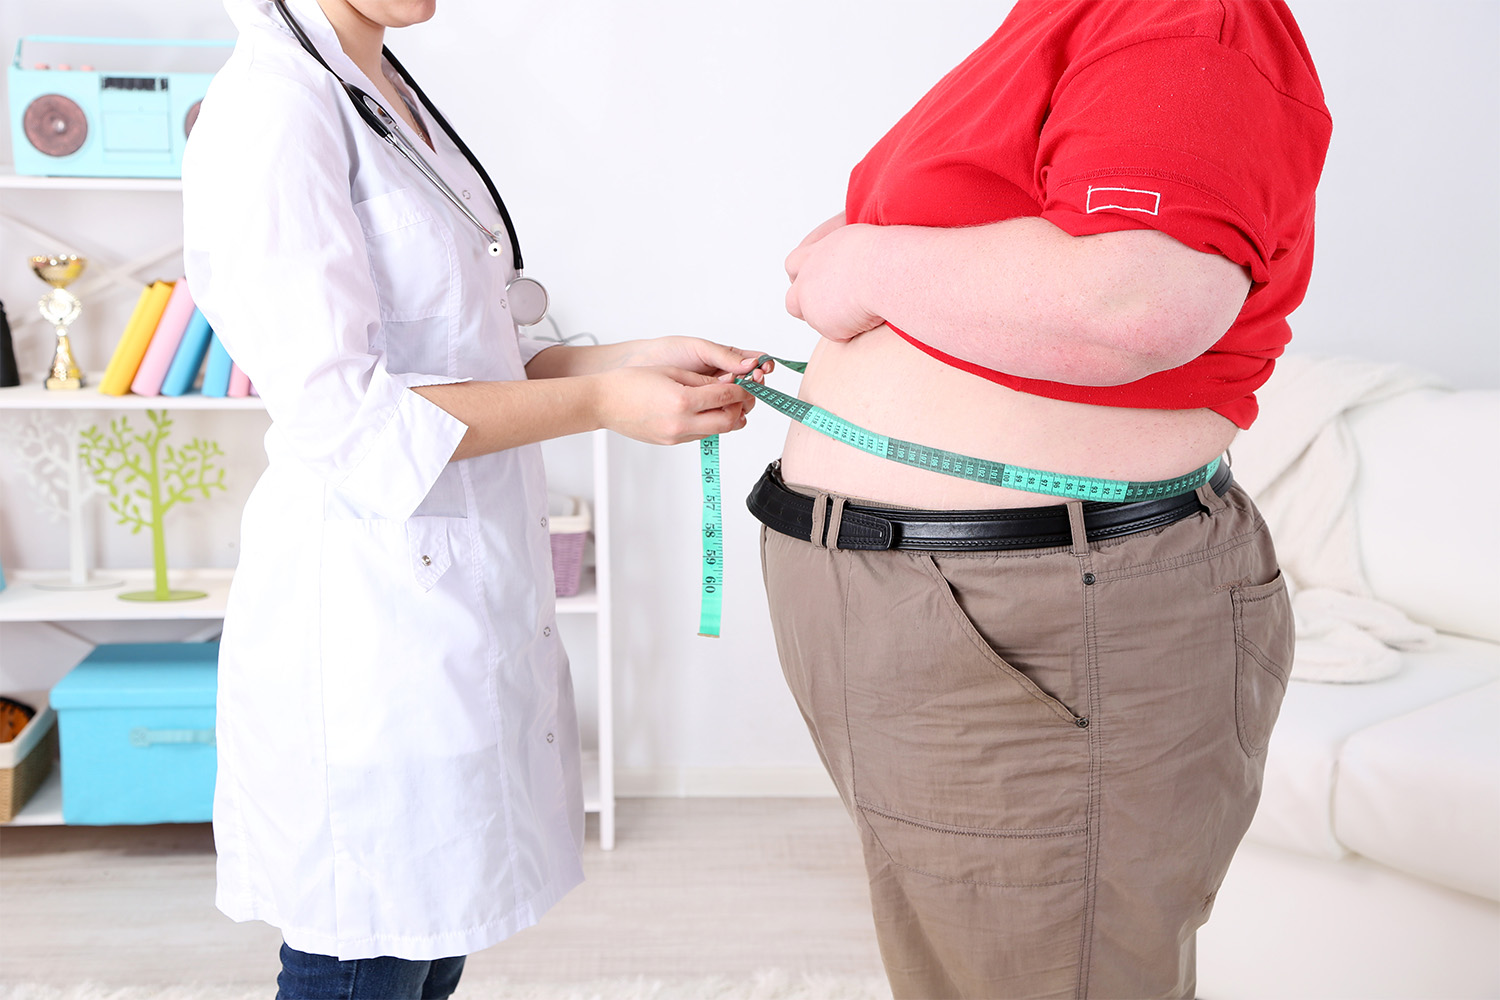 Obesity and Testosterone: Everything You Need To Know